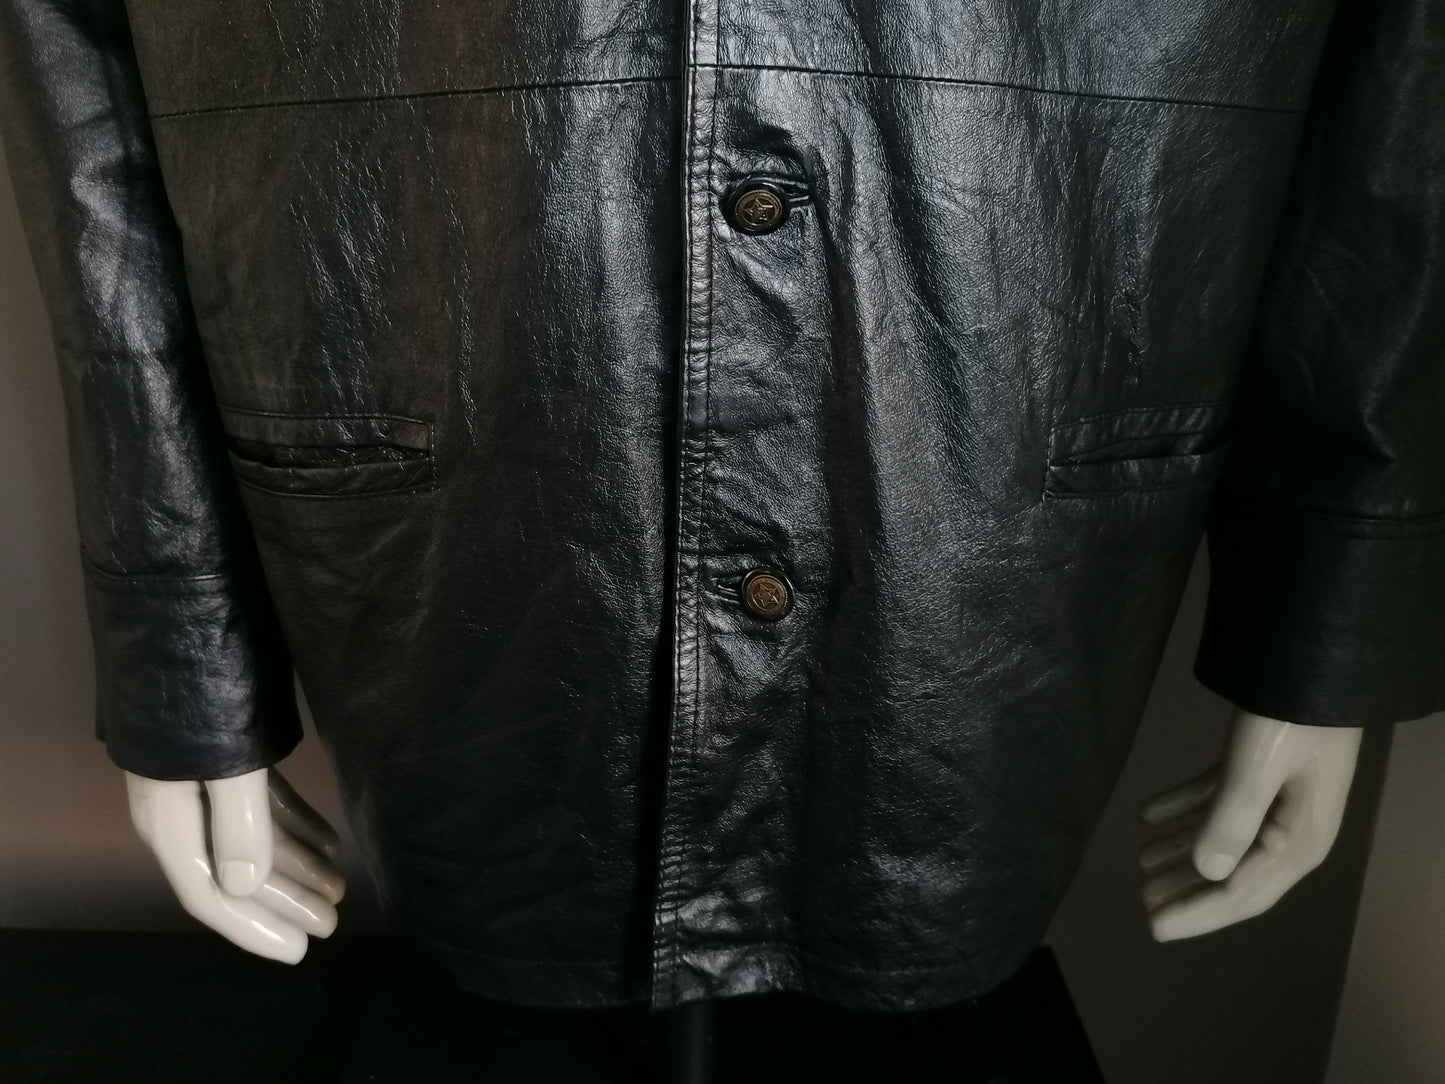 Tyler half -length leather jacket with beautiful buttons. Fed. Black colored. Size XL.